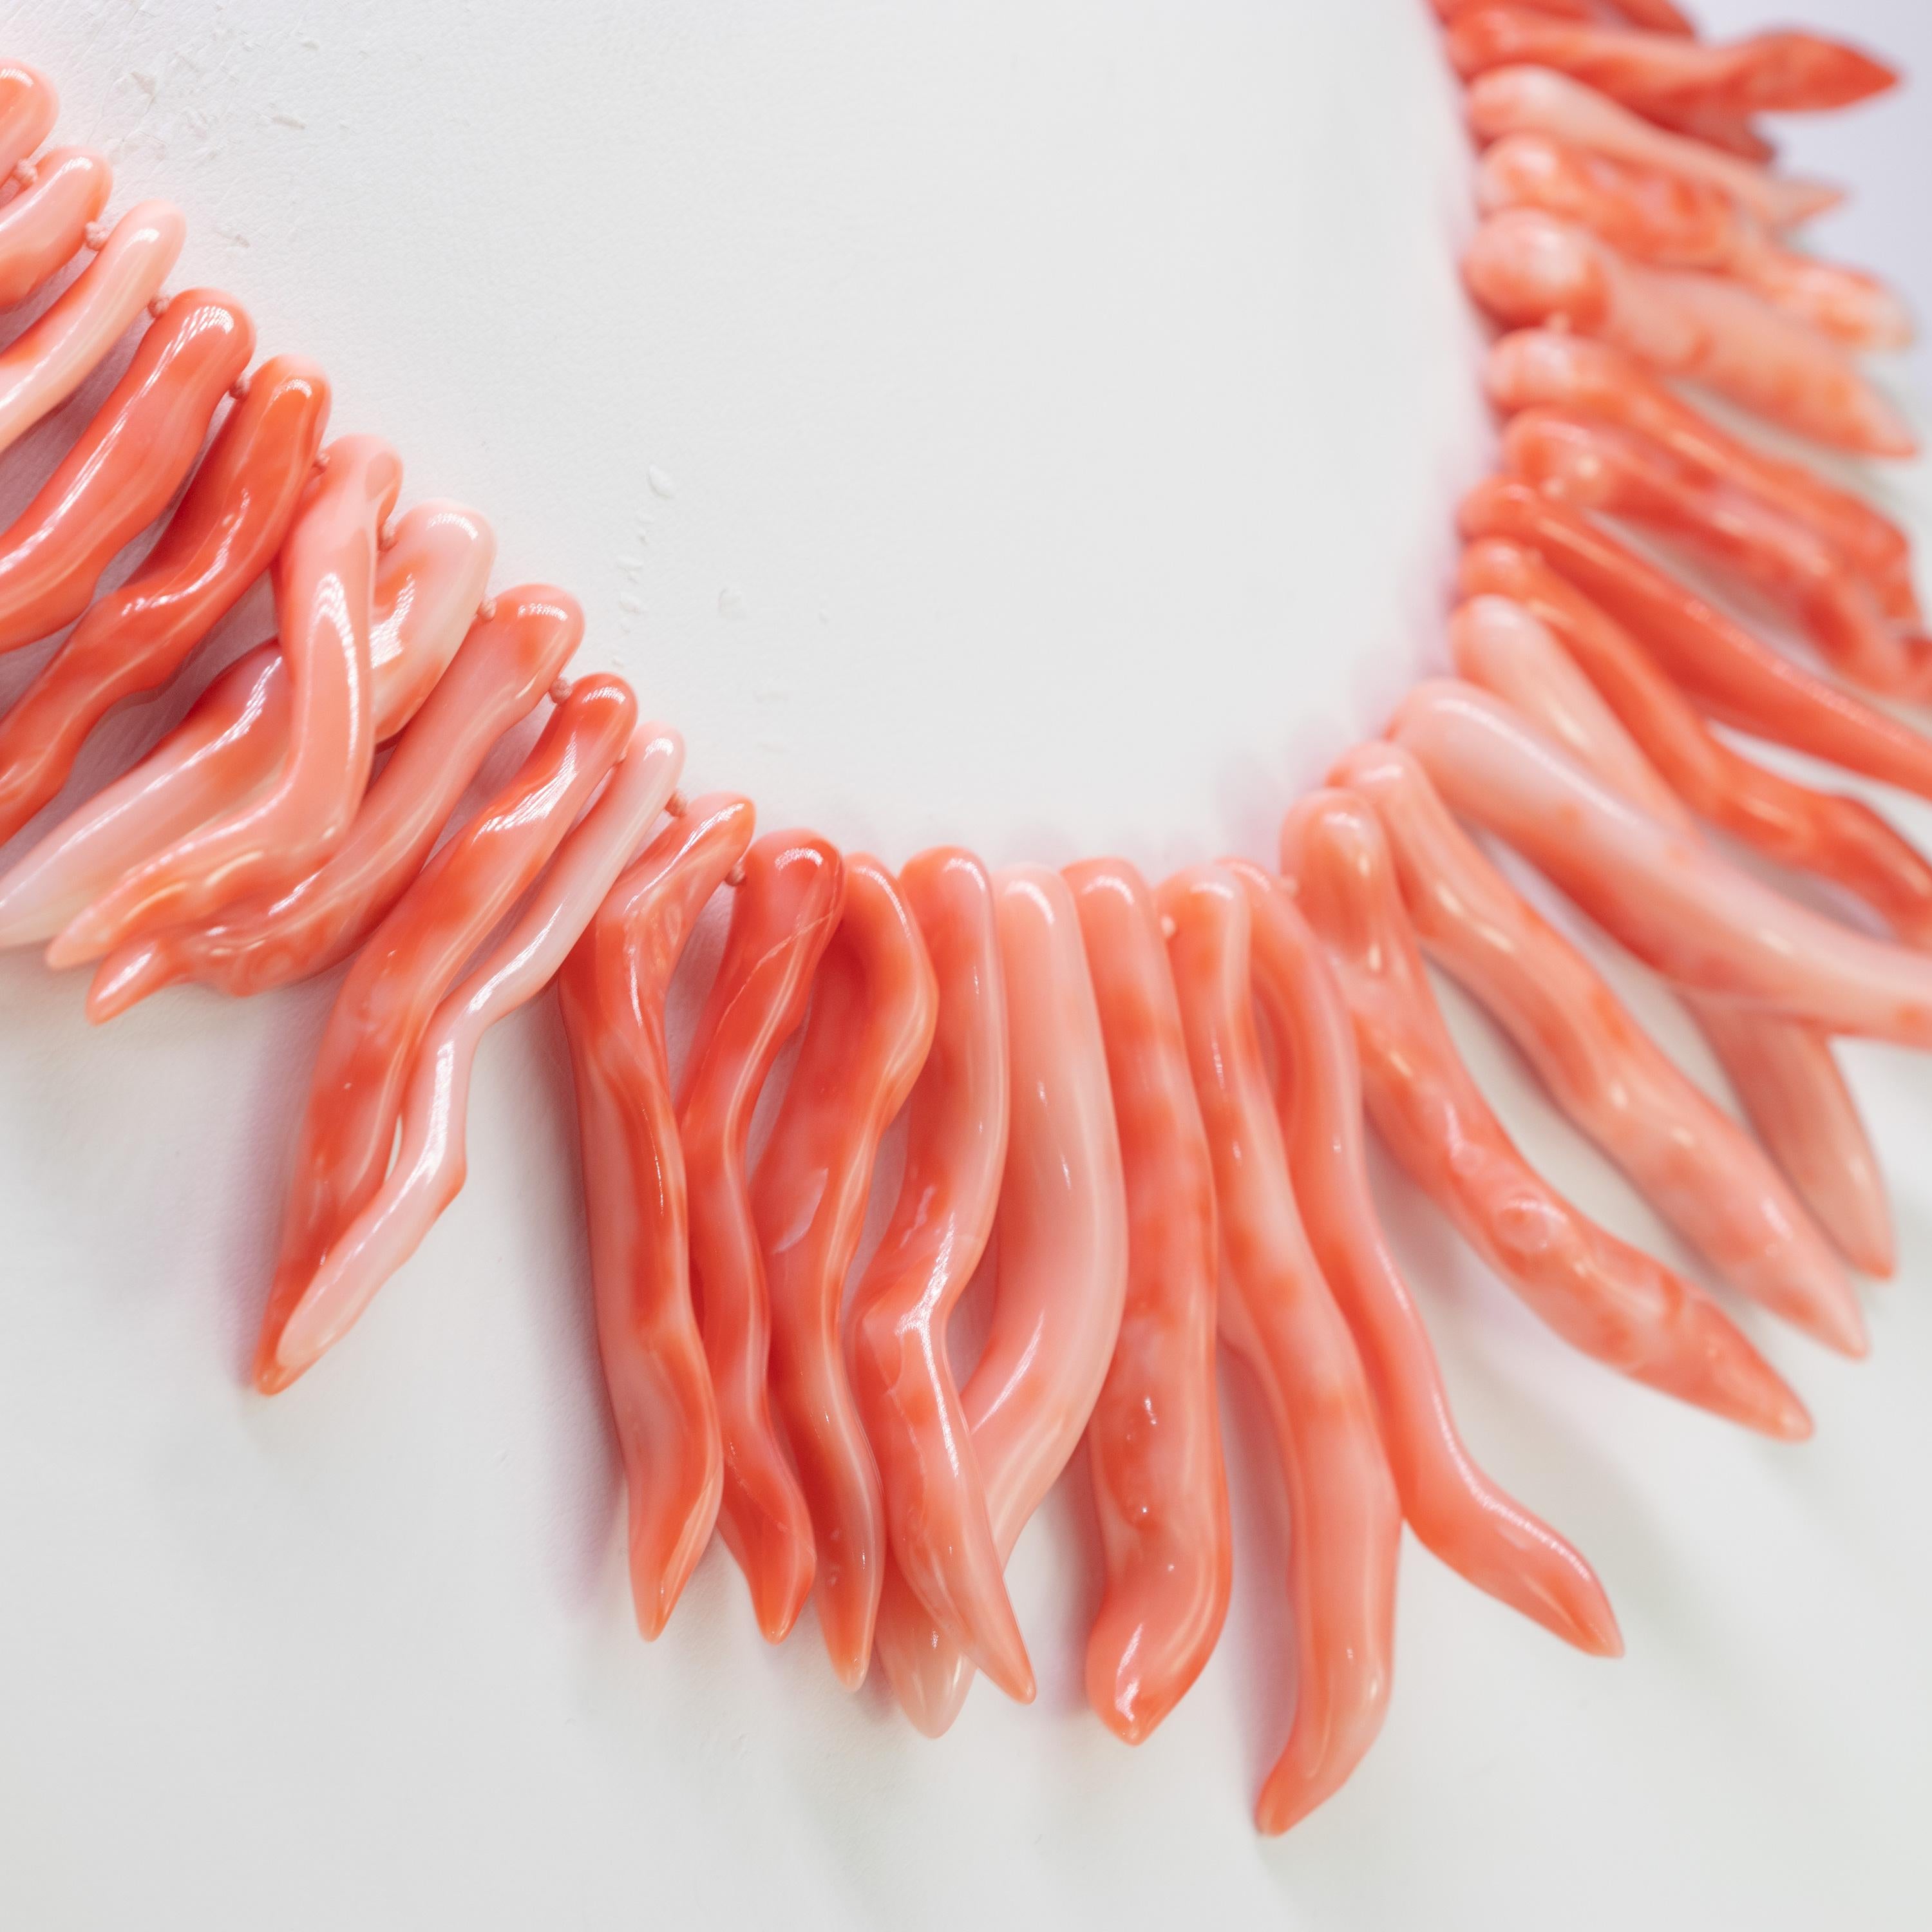 Astonishing necklace it is made of individual branches of natural coral that have been polished and drilled for stringing. Deep, rich, red coral from the Medditerranean is featured in this artwork.

This design is inspired by the red starfish, one